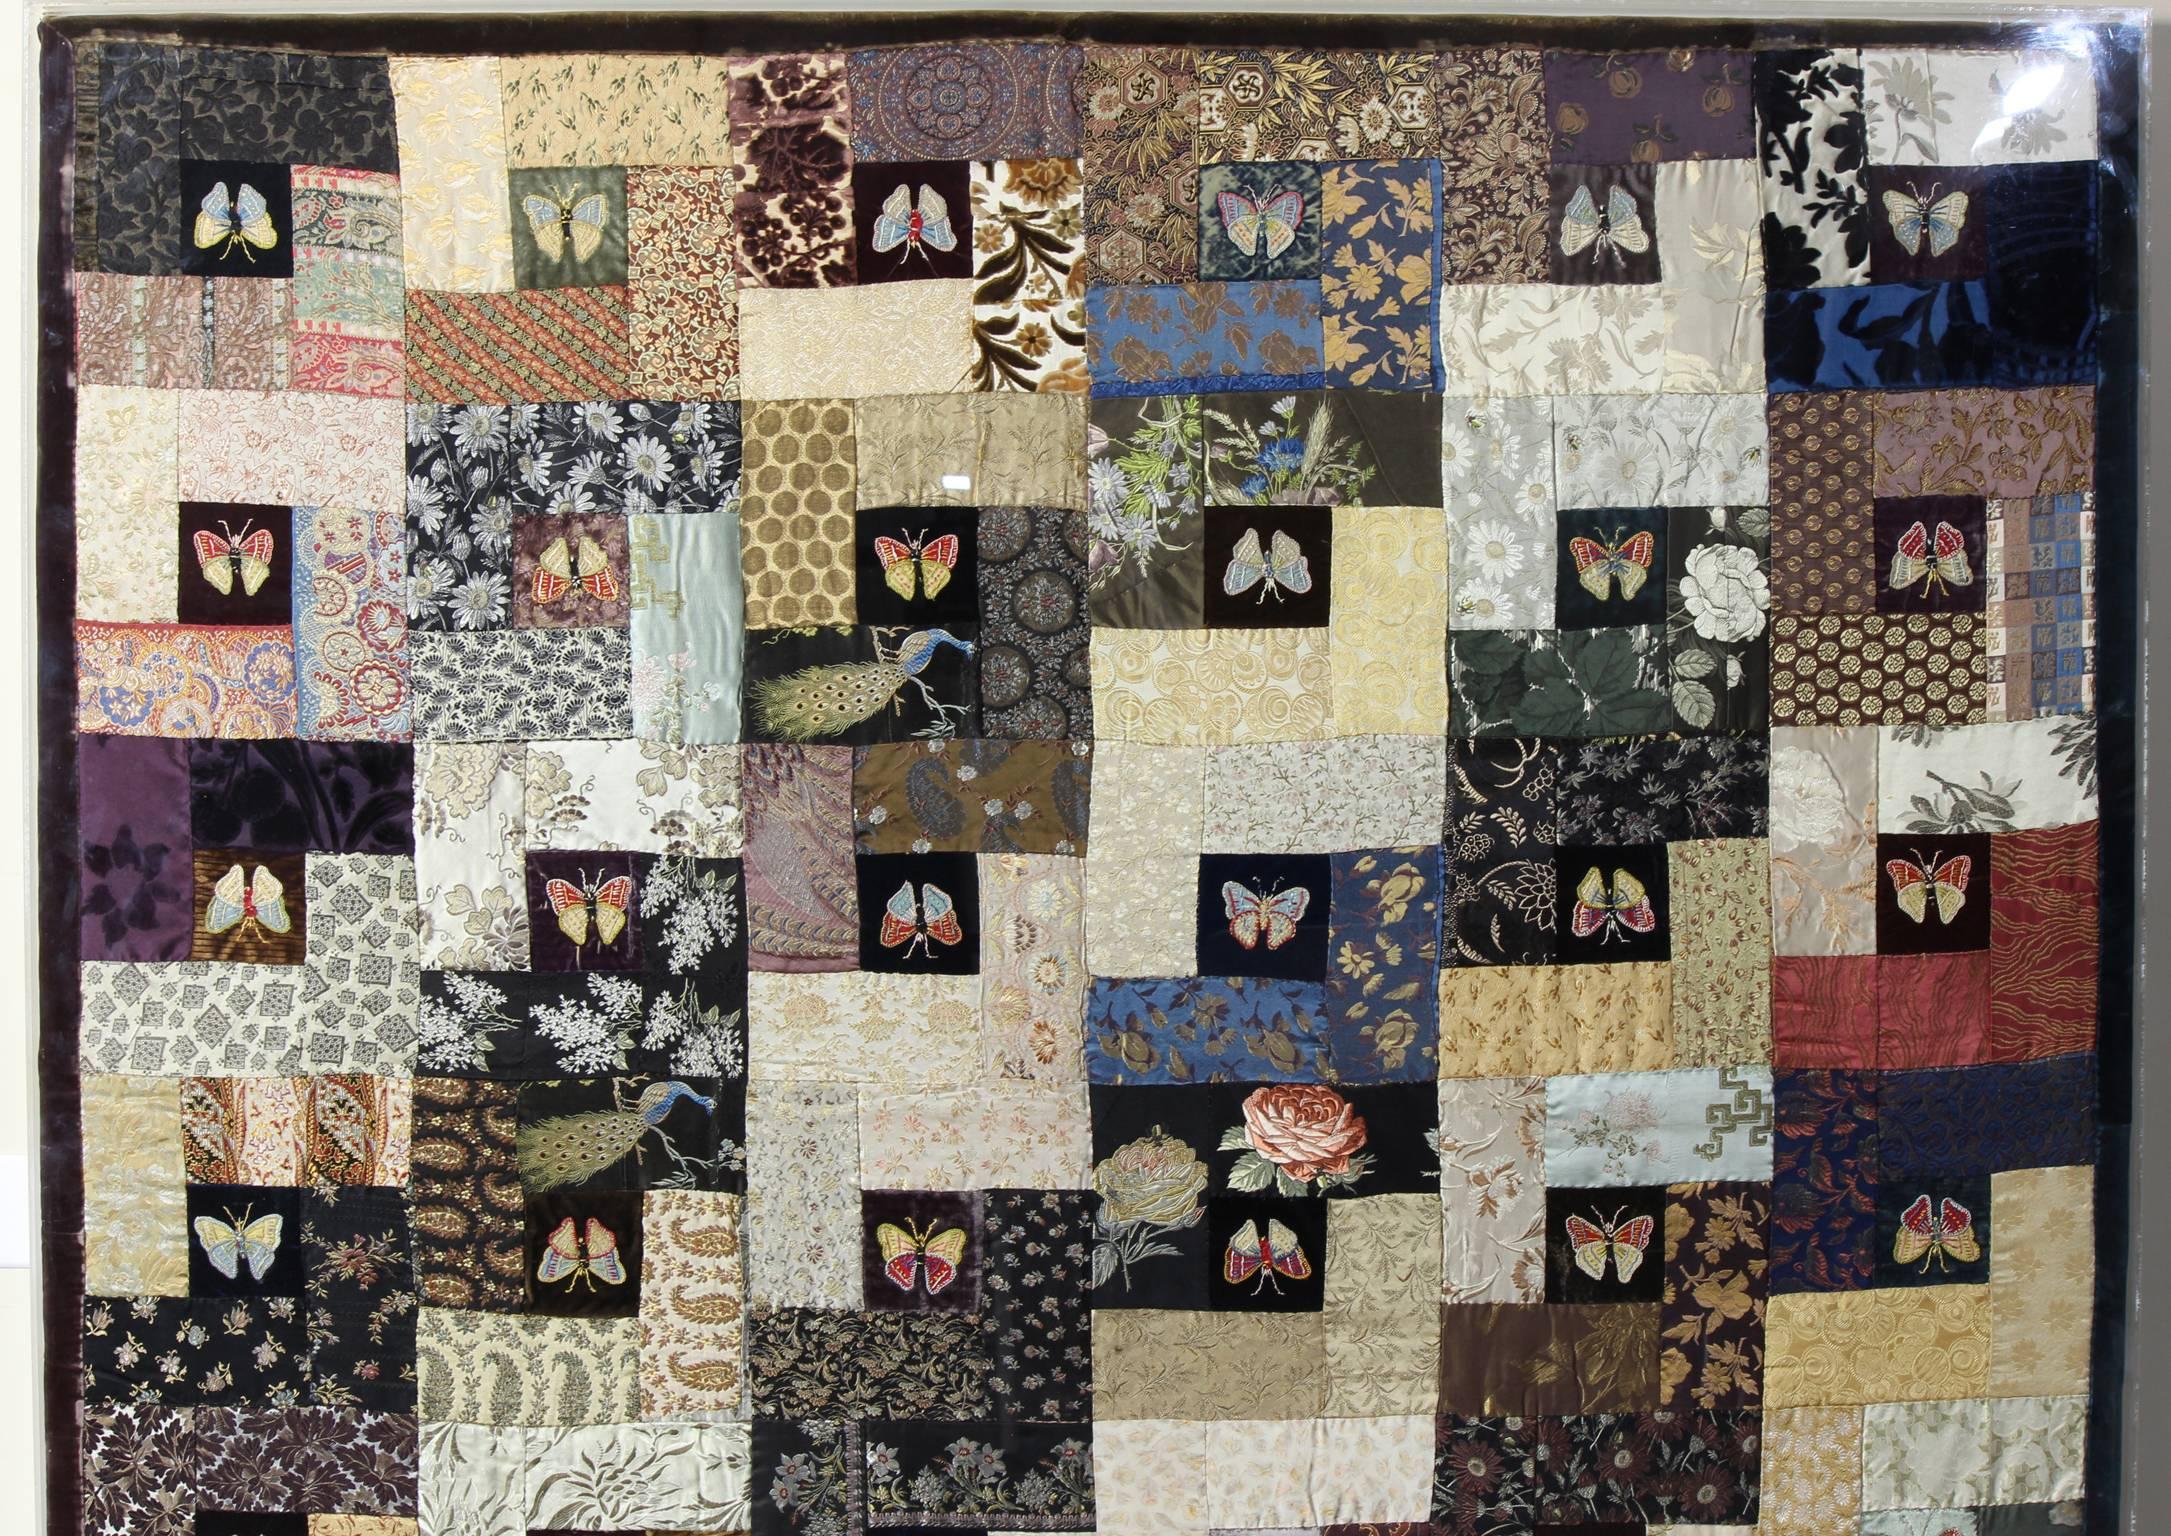 A charming late 19th century crazy quilt done in embroidered silk and velvet squares depicting butterflies, peacocks and flowers. The quilt is nicely mounted in a Lucite frame for hanging.